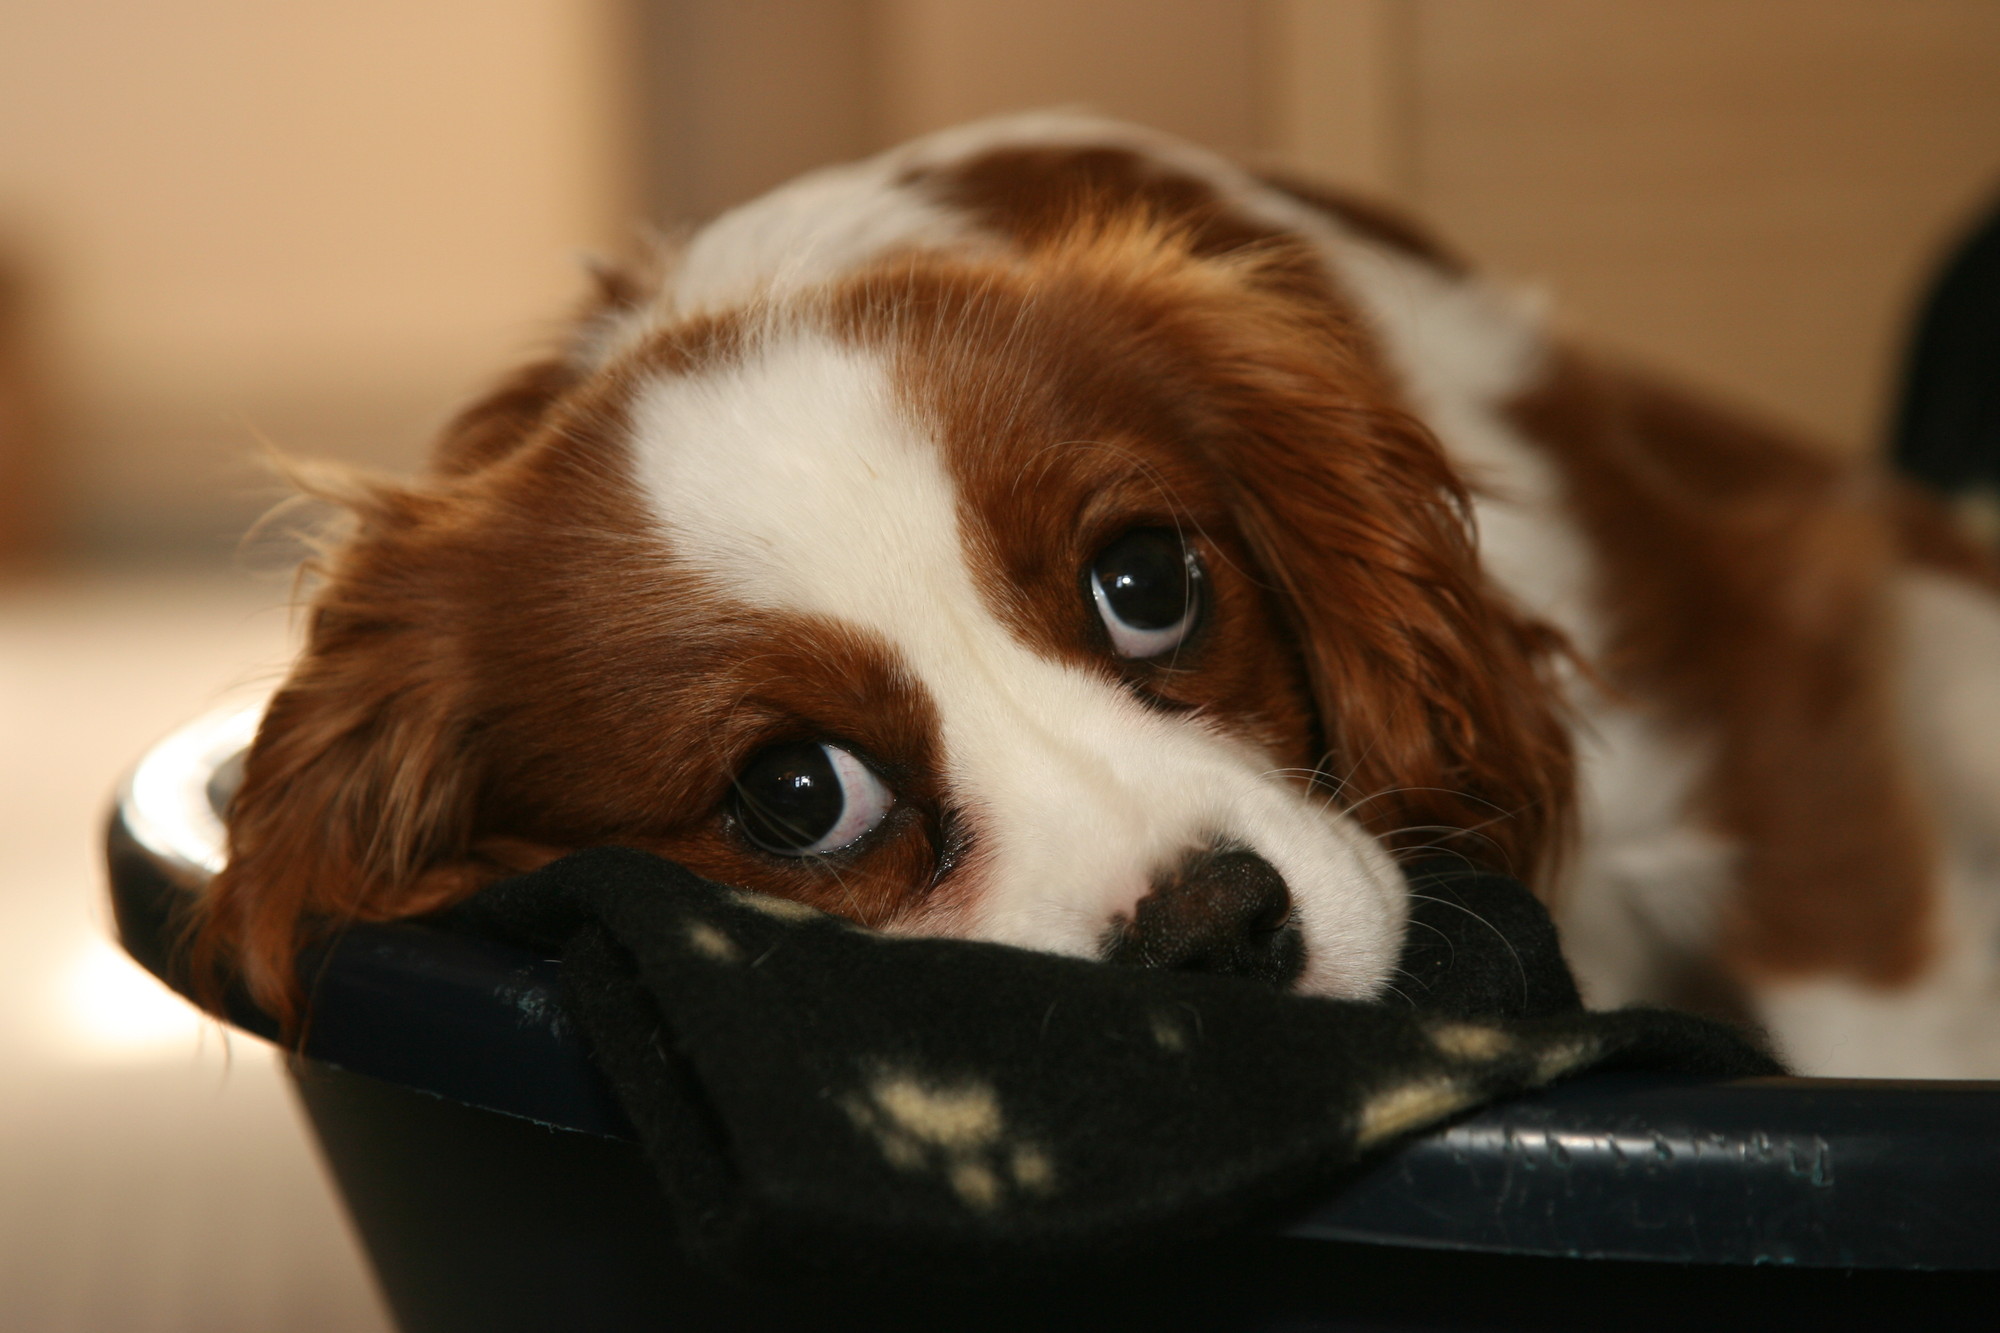 Max, a six-month-old King Charles spaniel belonging to Tony Goodchild (site maintenance supervisor), in his basket in the supporter services office, Burford. PL/00219 - Burford - 1.3.07 - Photographer - Nick Ridley